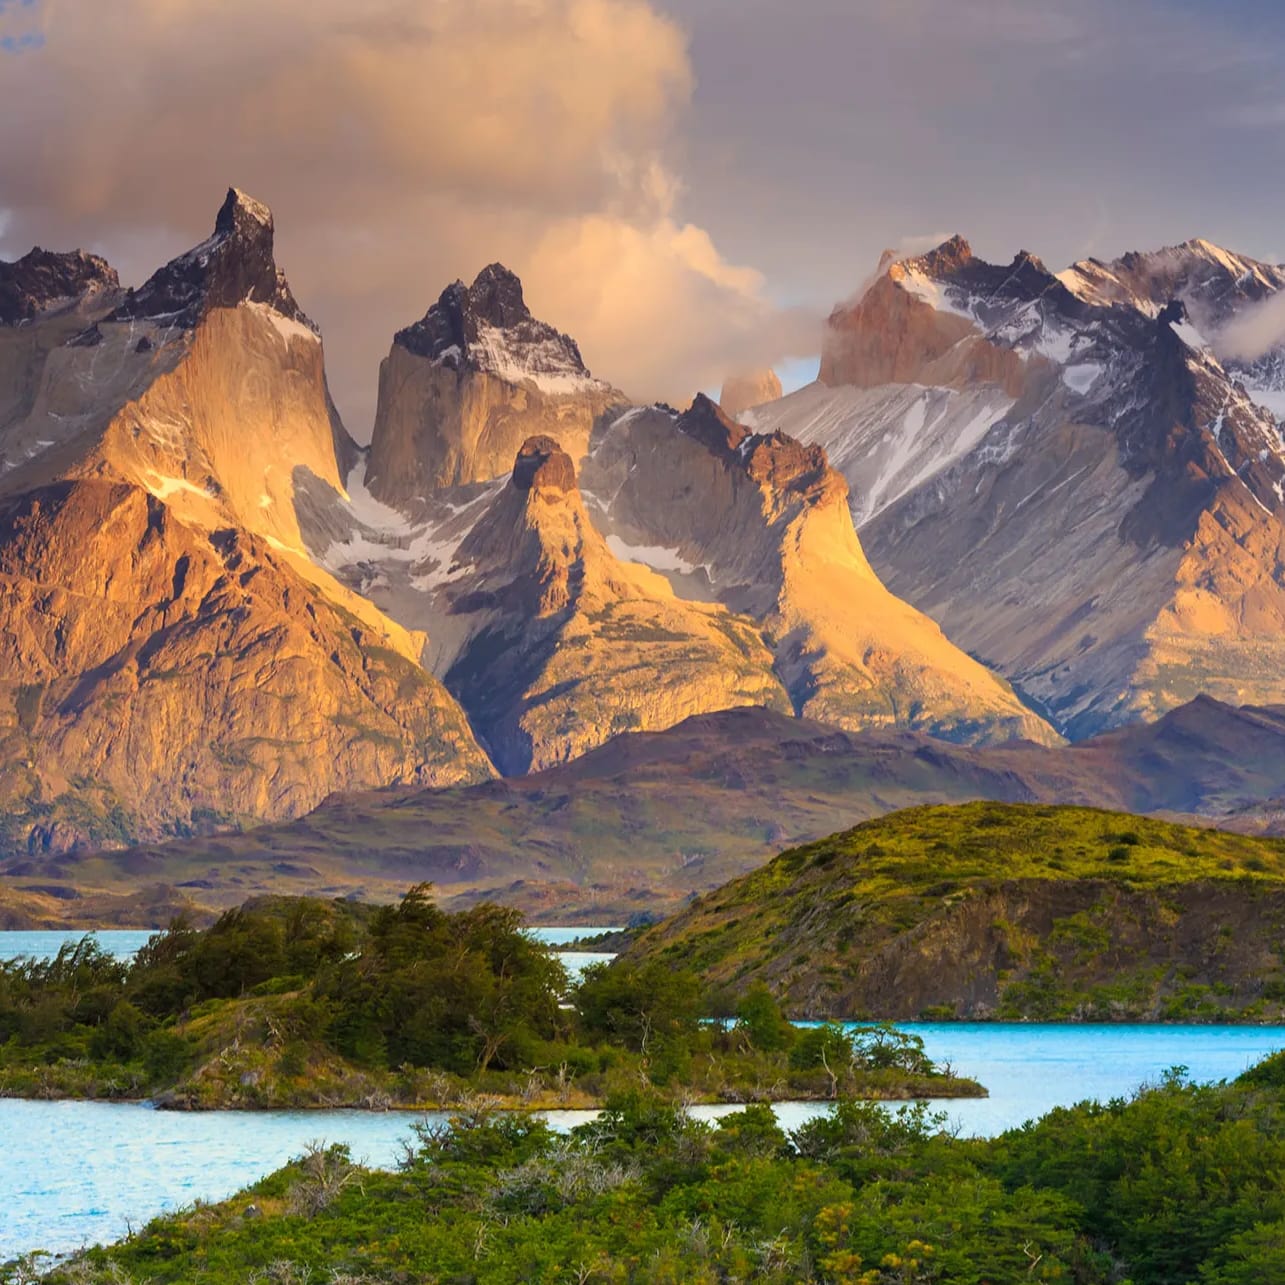 Patagonia Expedition - Torres del Paine National Park